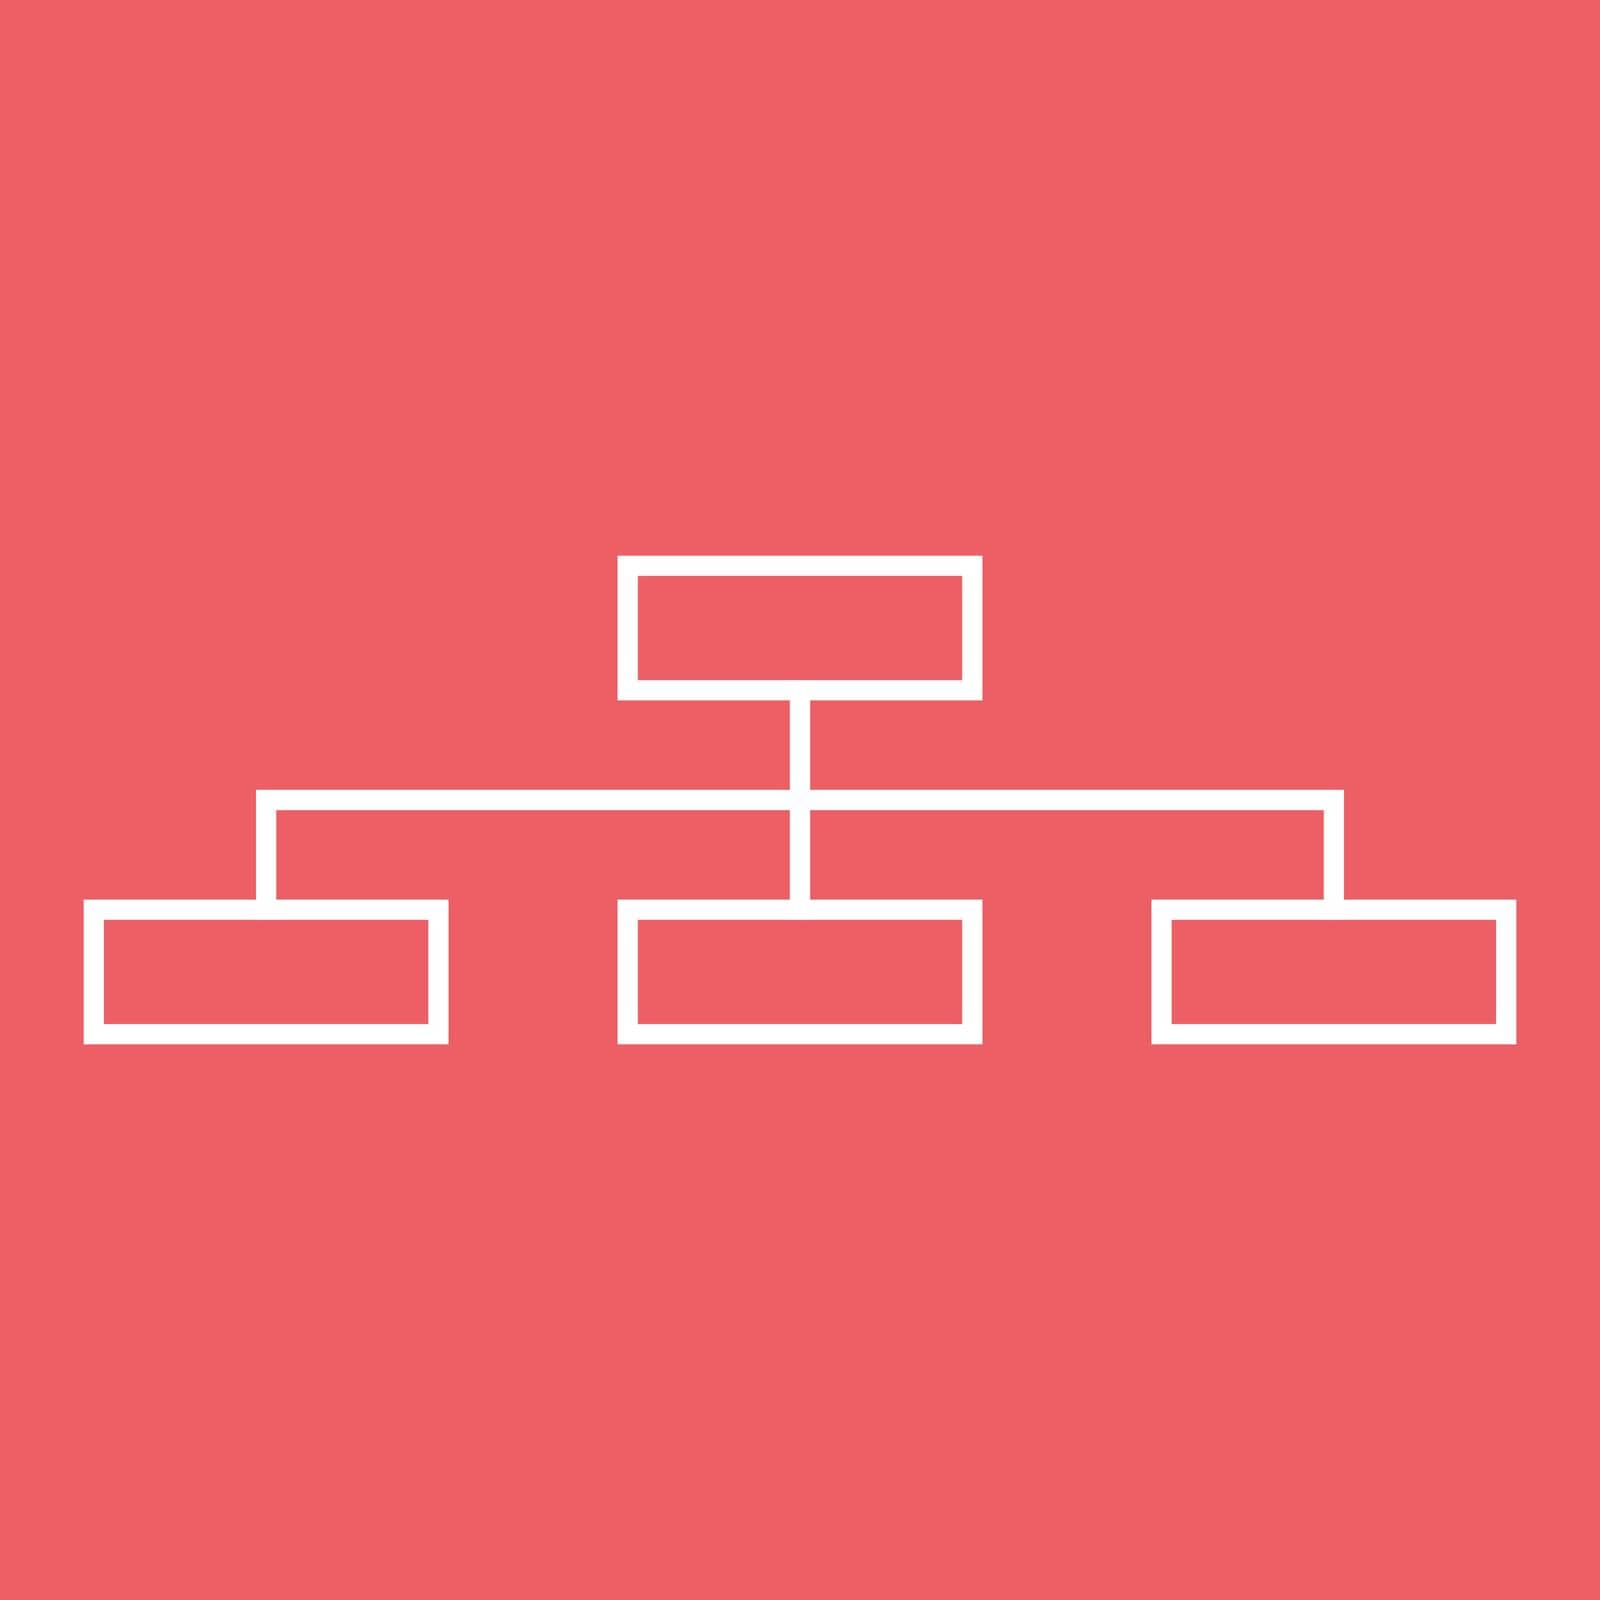 Structure simple flat icon. Vector illustration on red background.